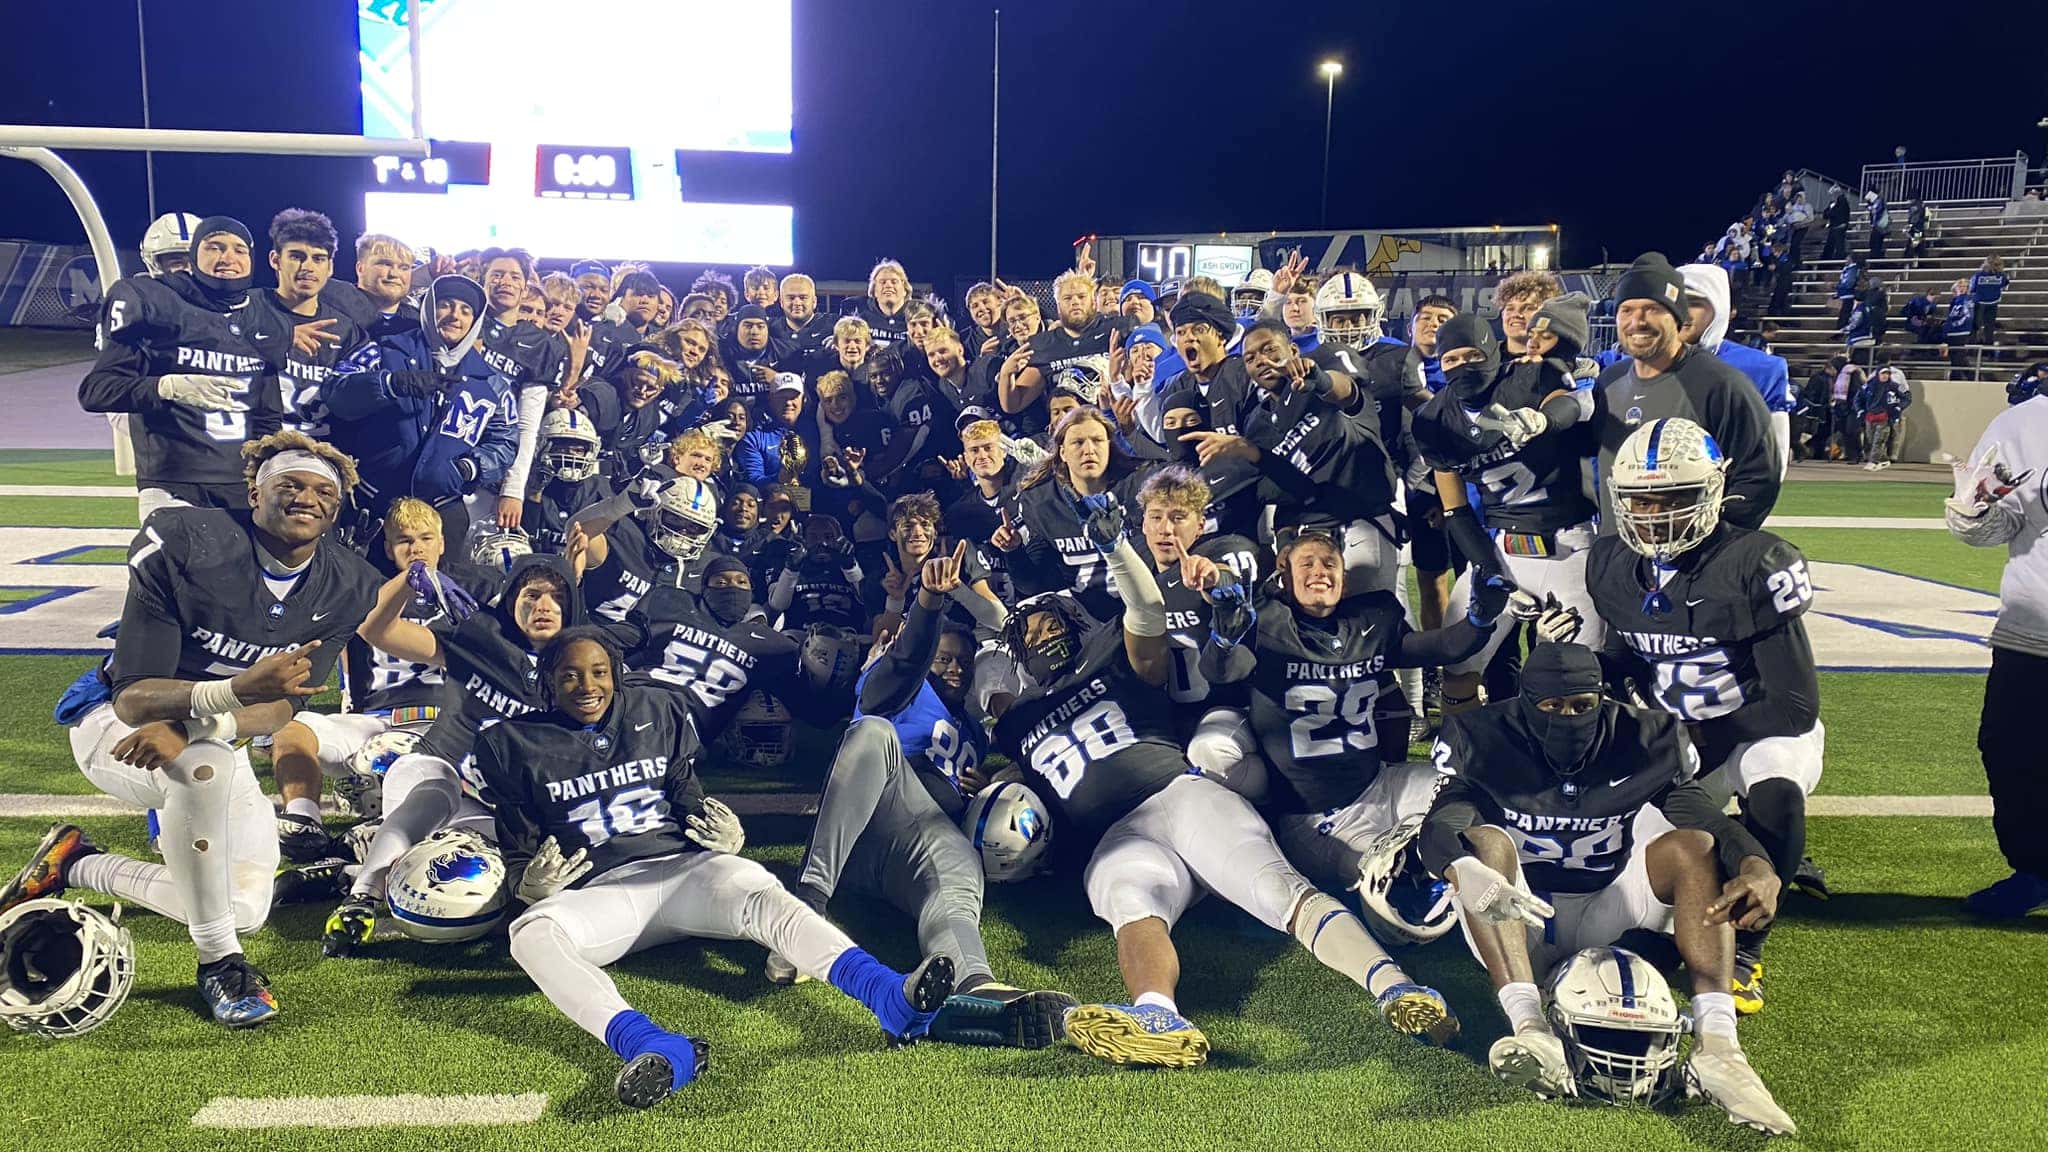 Midlothian Panthers Face Aledo Bearcats This Friday With A Chance To Make  History